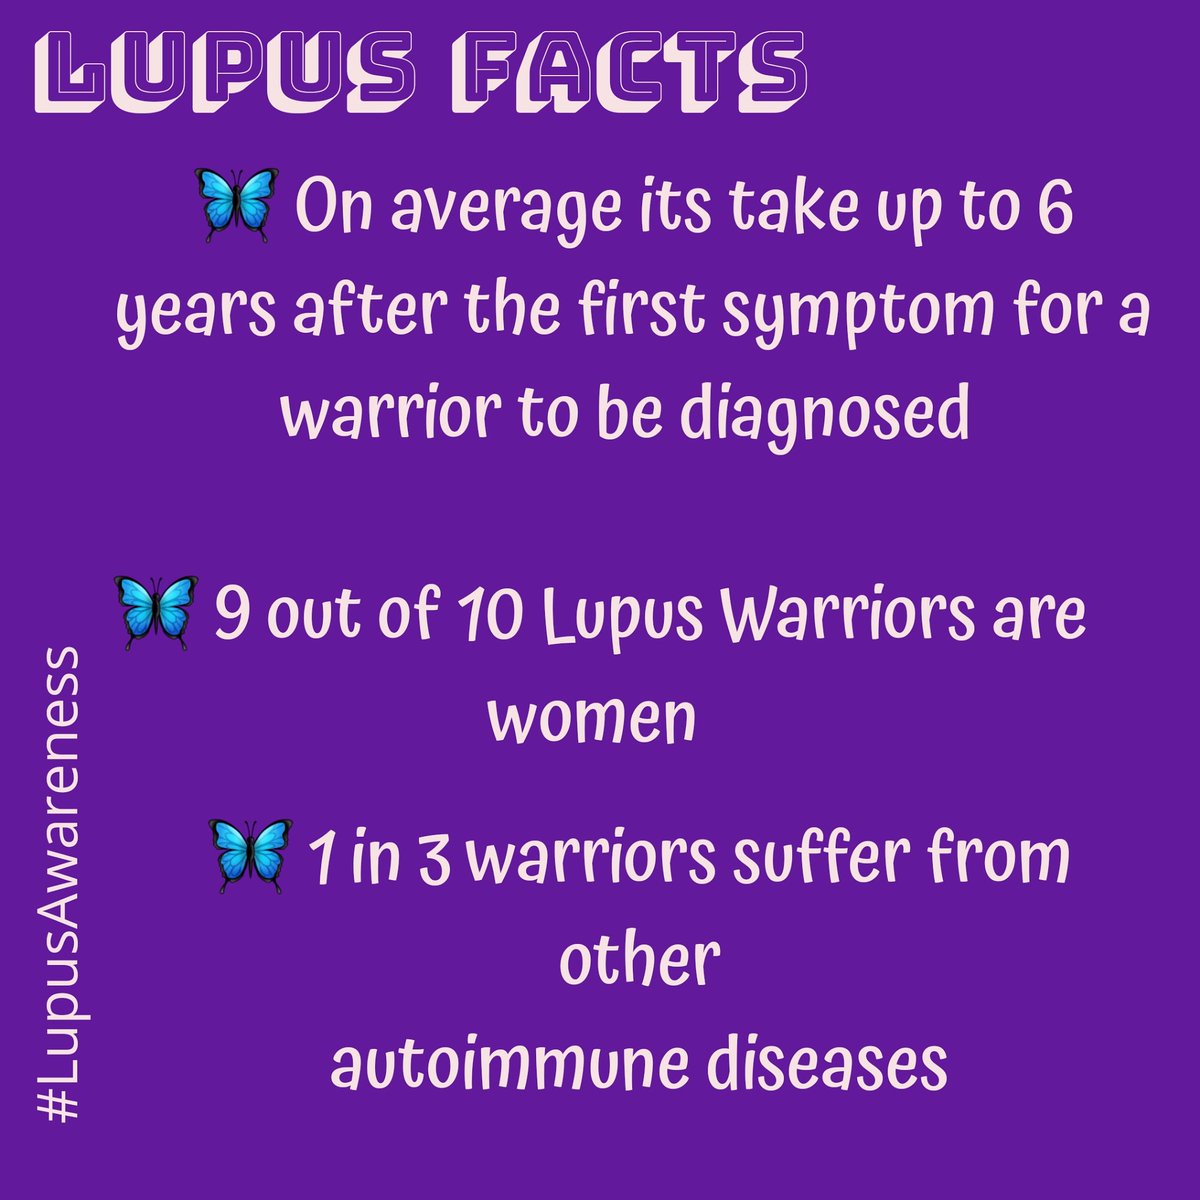 Day 5, accidentally missed Day 4 since the wife has been helping me out with the facts and she is currently flaring. Charity Stream starts Friday at 7:30pm EST.
Twitch.tv/oneomen
#LupusAwareness #LupusFlare #LupusWarrior #SolvingTheCruelMystery #OmenFam #Facts #TheStruggle